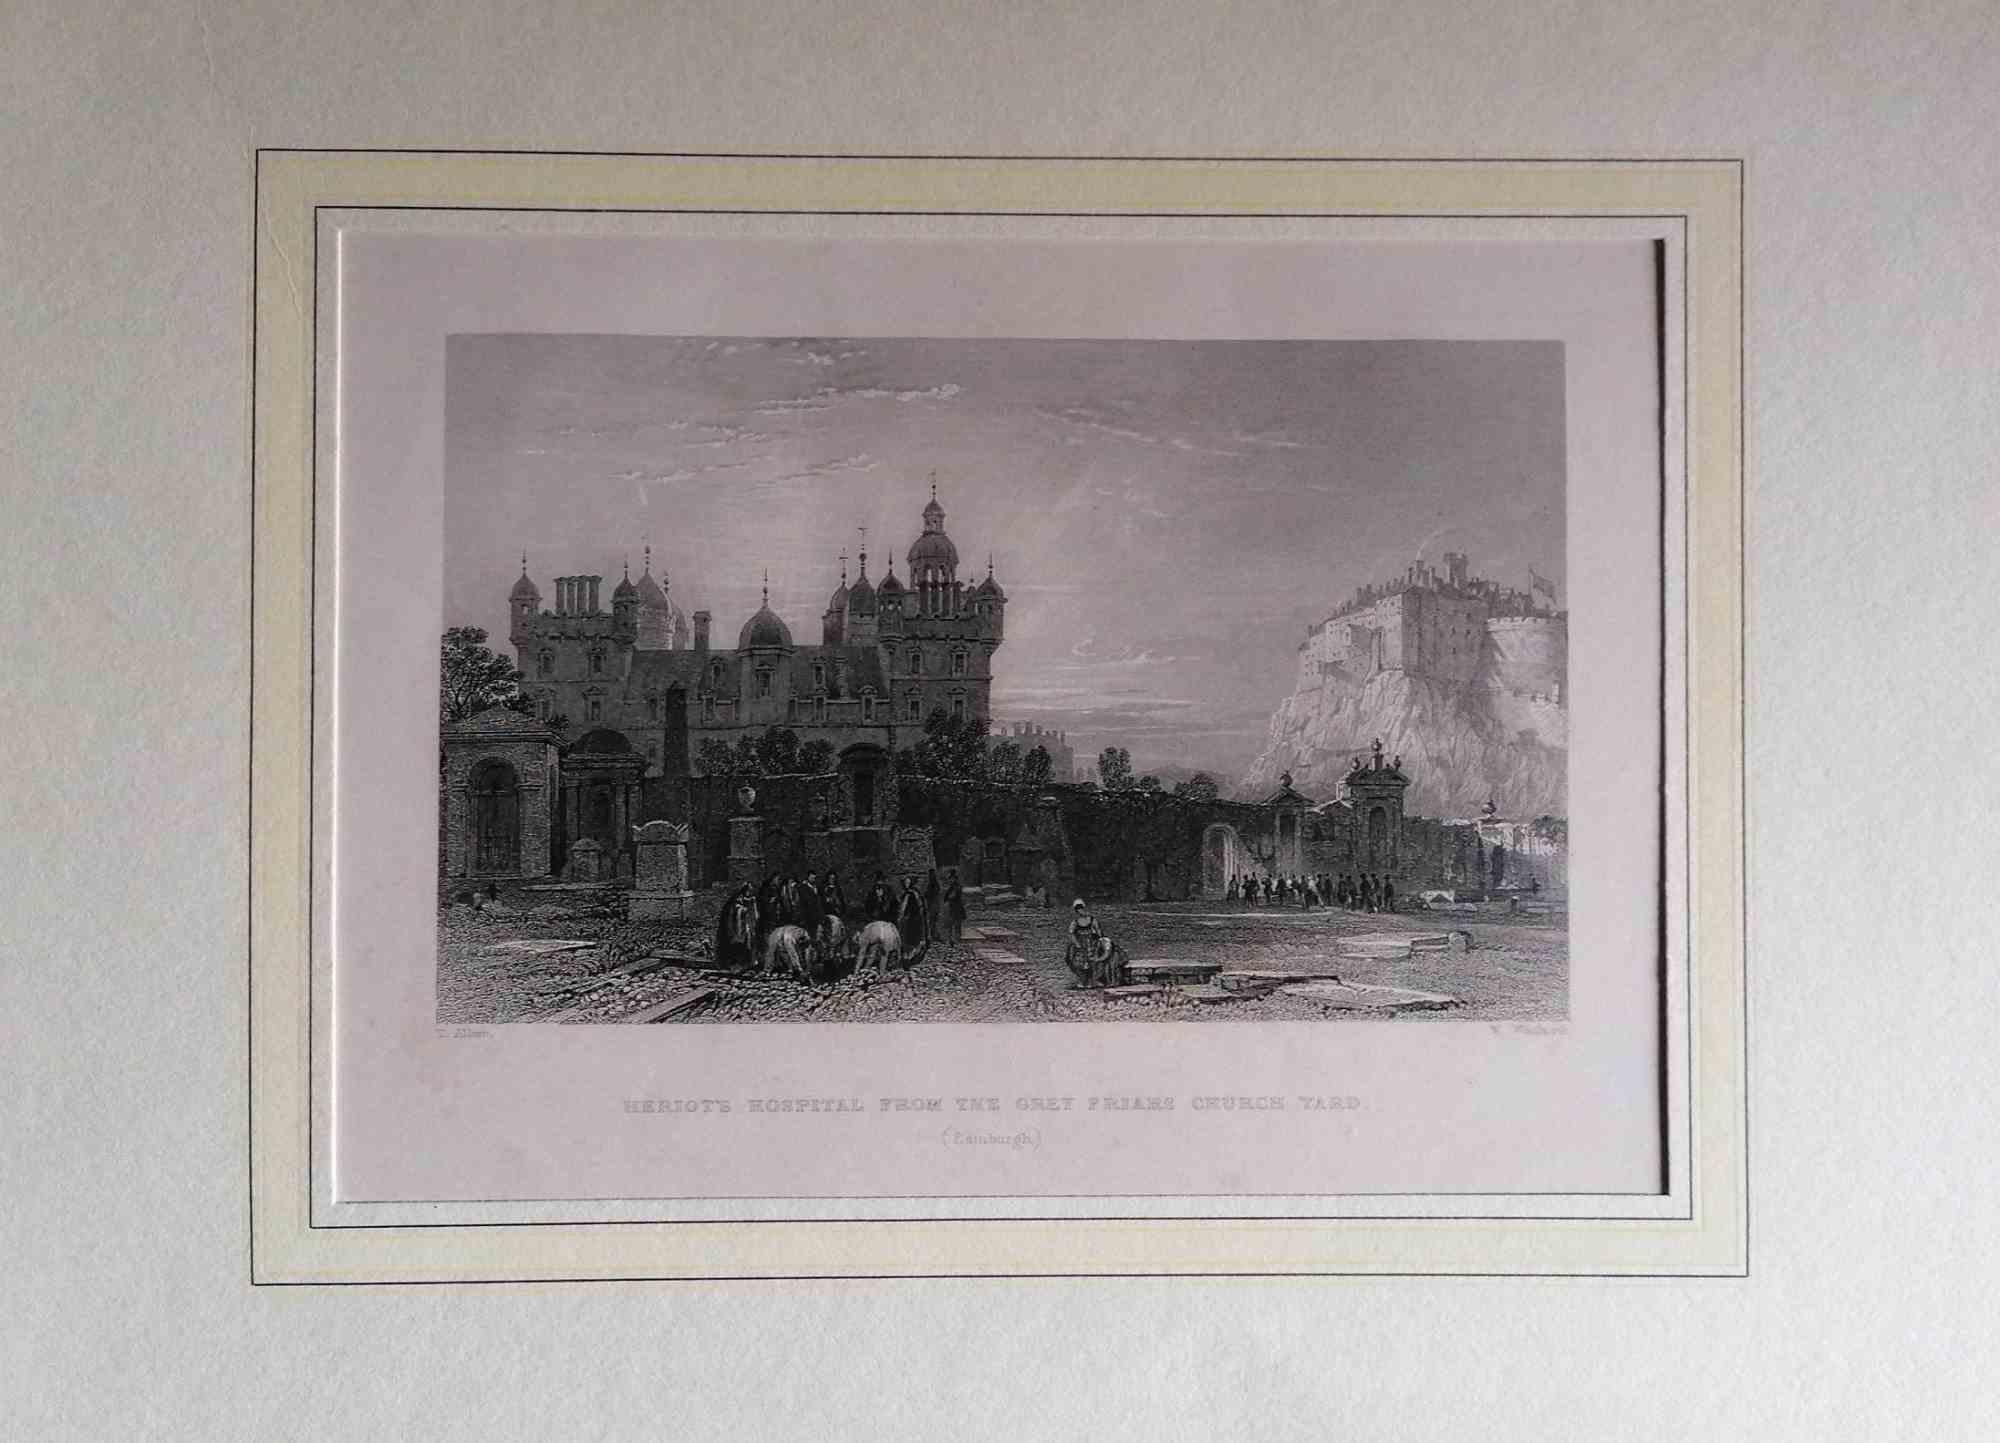 Unknown Figurative Print - Heriot's Hospital - Original Lithograph - Mid-19th Century